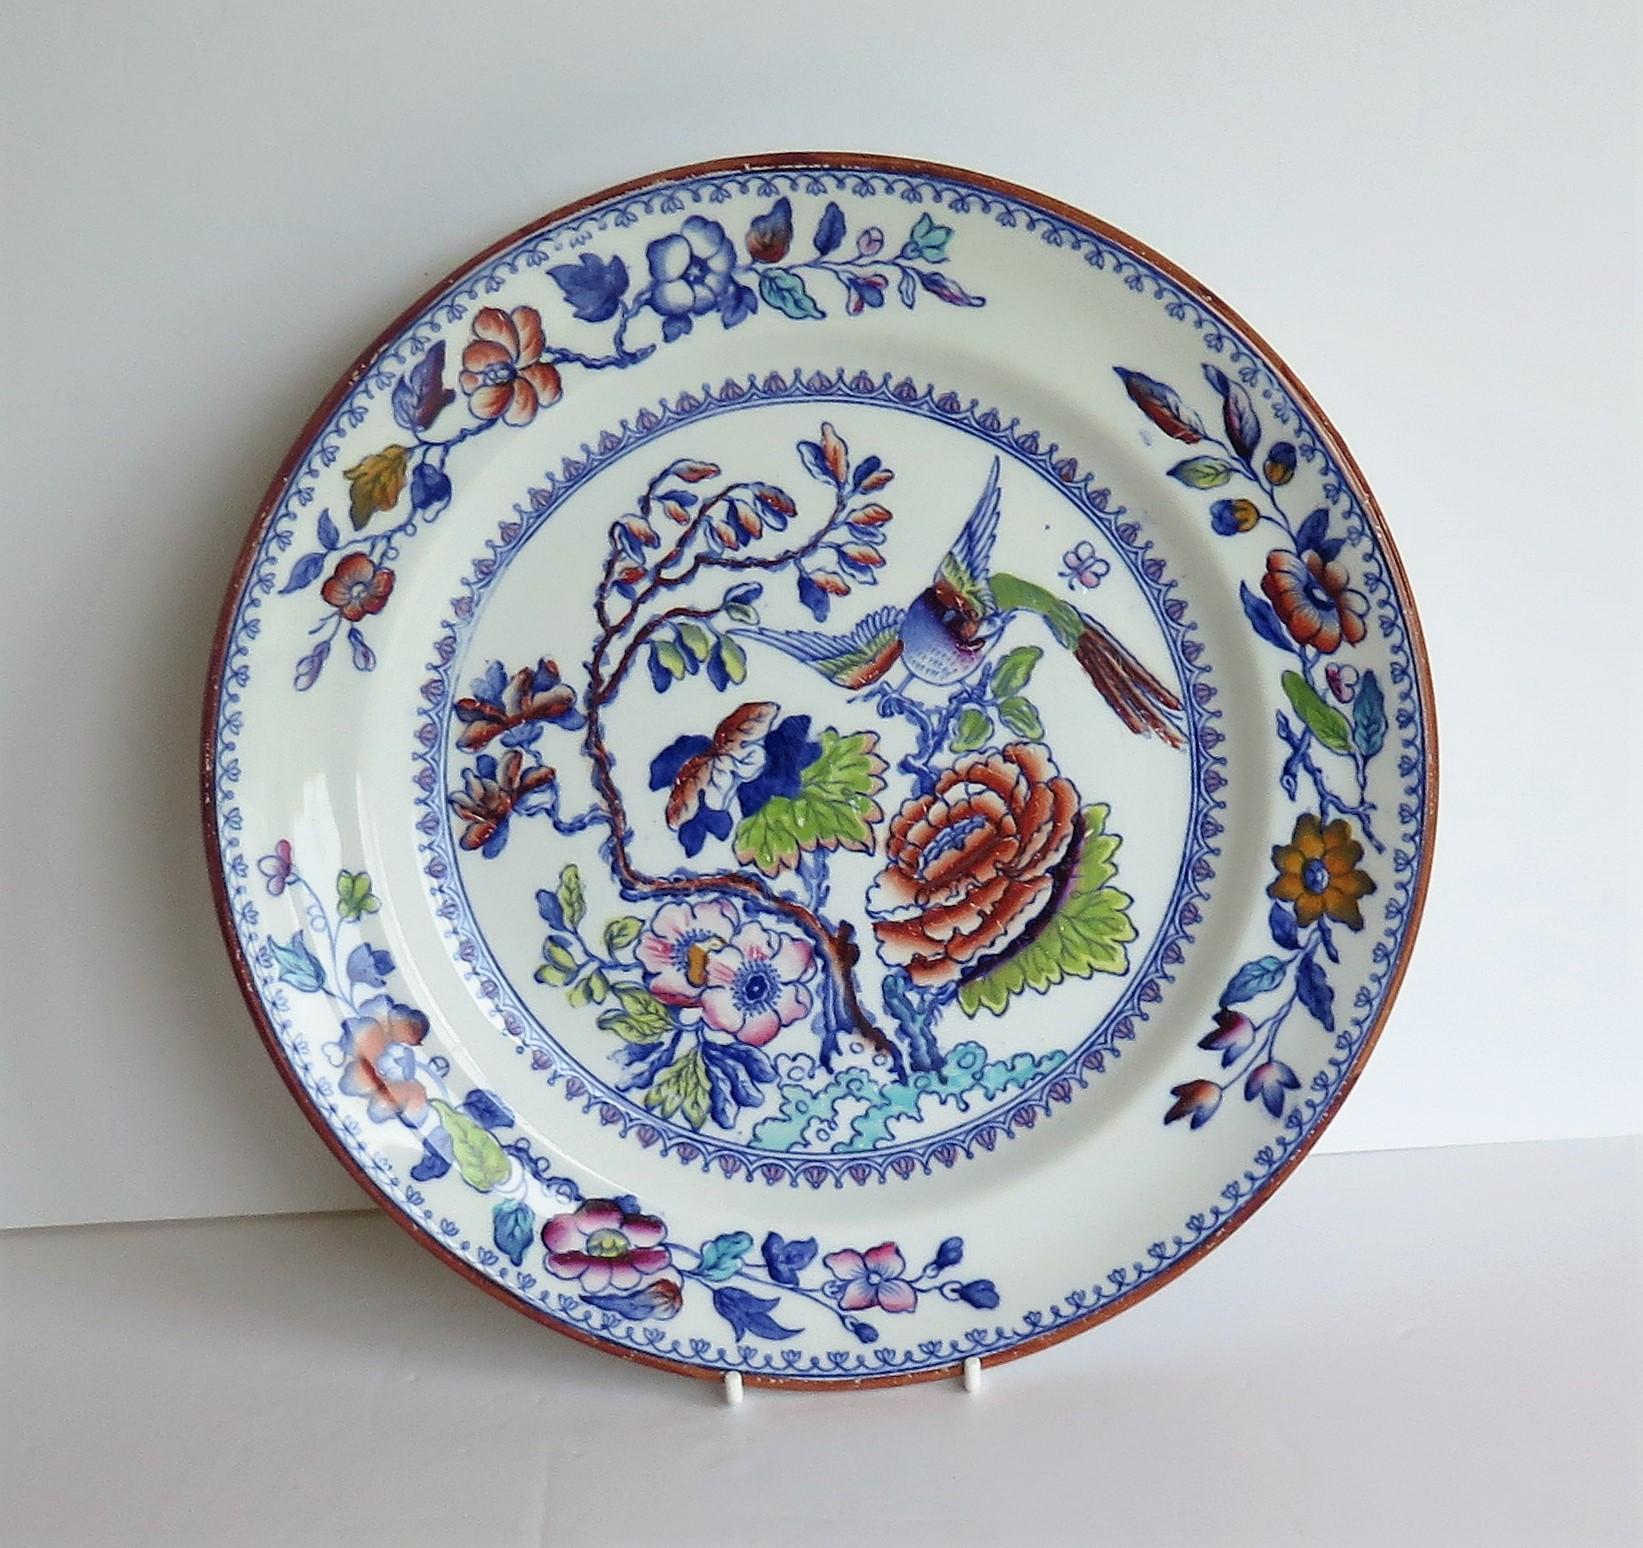 This is a good Mason’s ironstone large dinner plate produced at the time when Mason's was owned and controlled by George L Ashworth and Brothers after the bankruptcy of C J Mason in 1848.

This large plate is decorated in a the striking chinoiserie